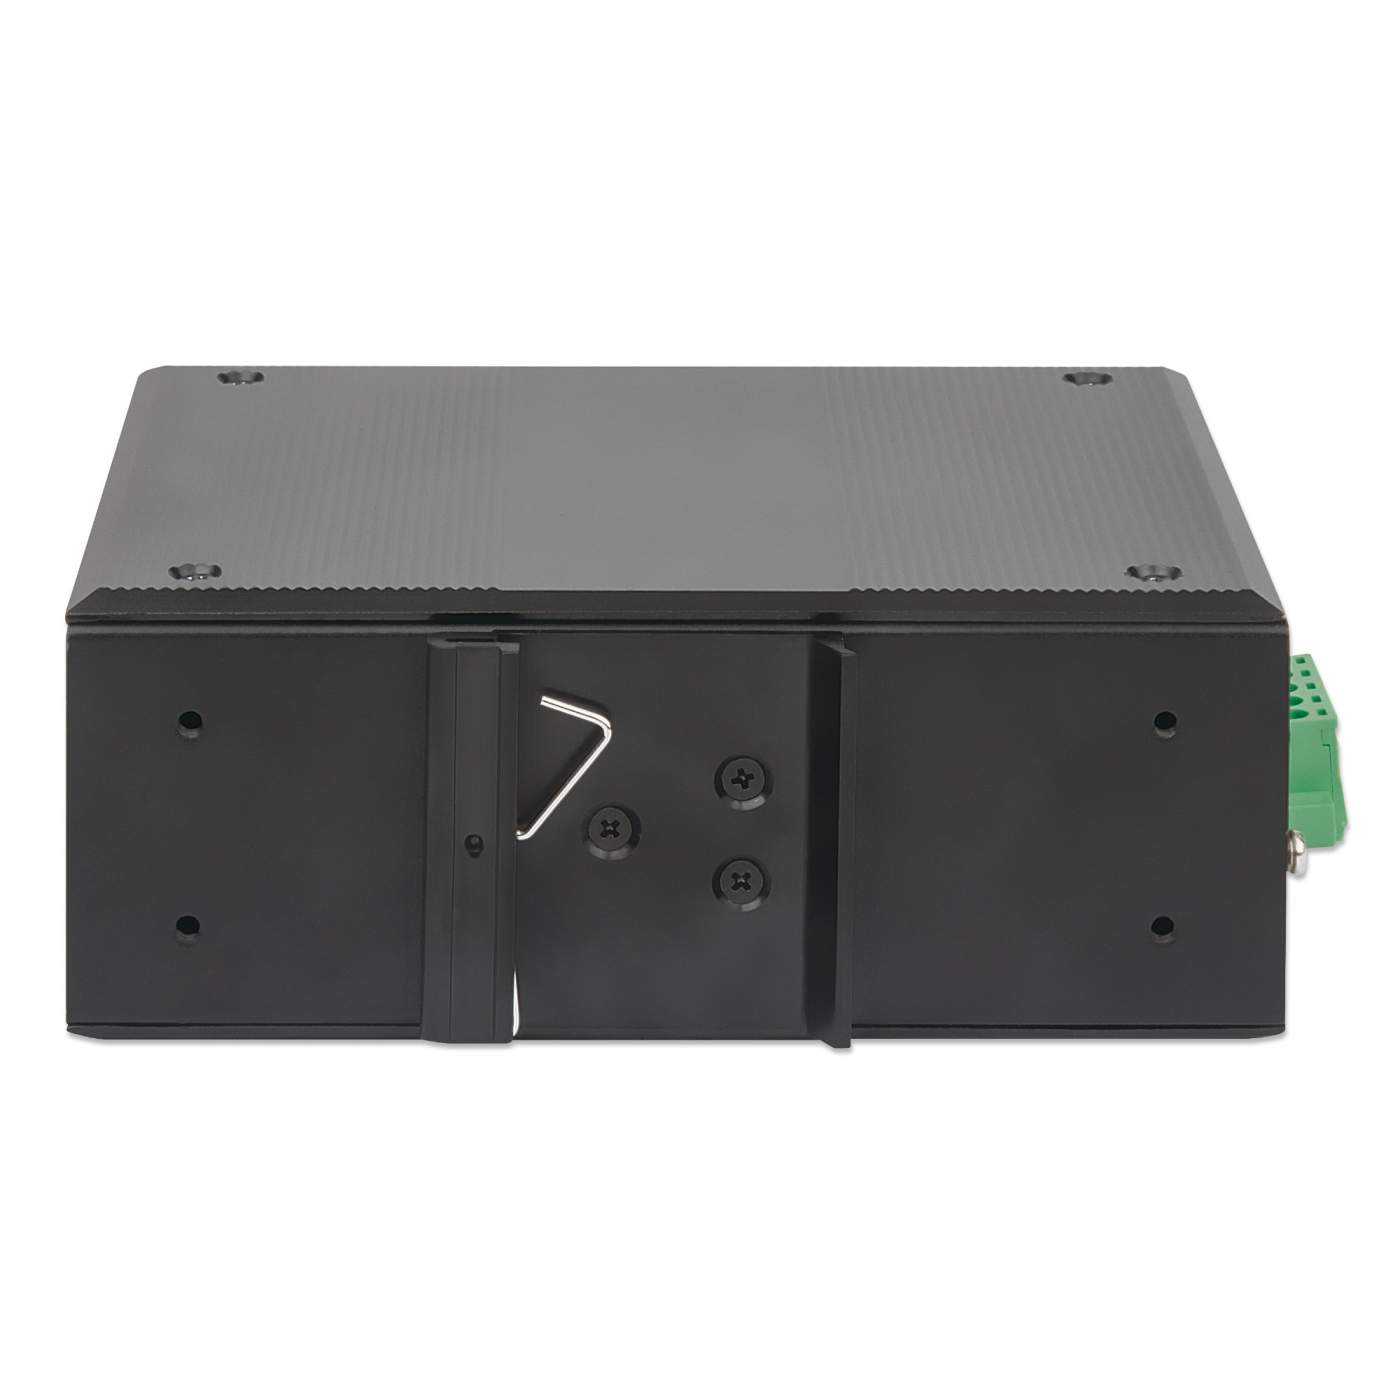 PoE-Powered 8-Port Gigabit Ethernet PoE+ Industrial Switch with PoE Passthrough Image 5